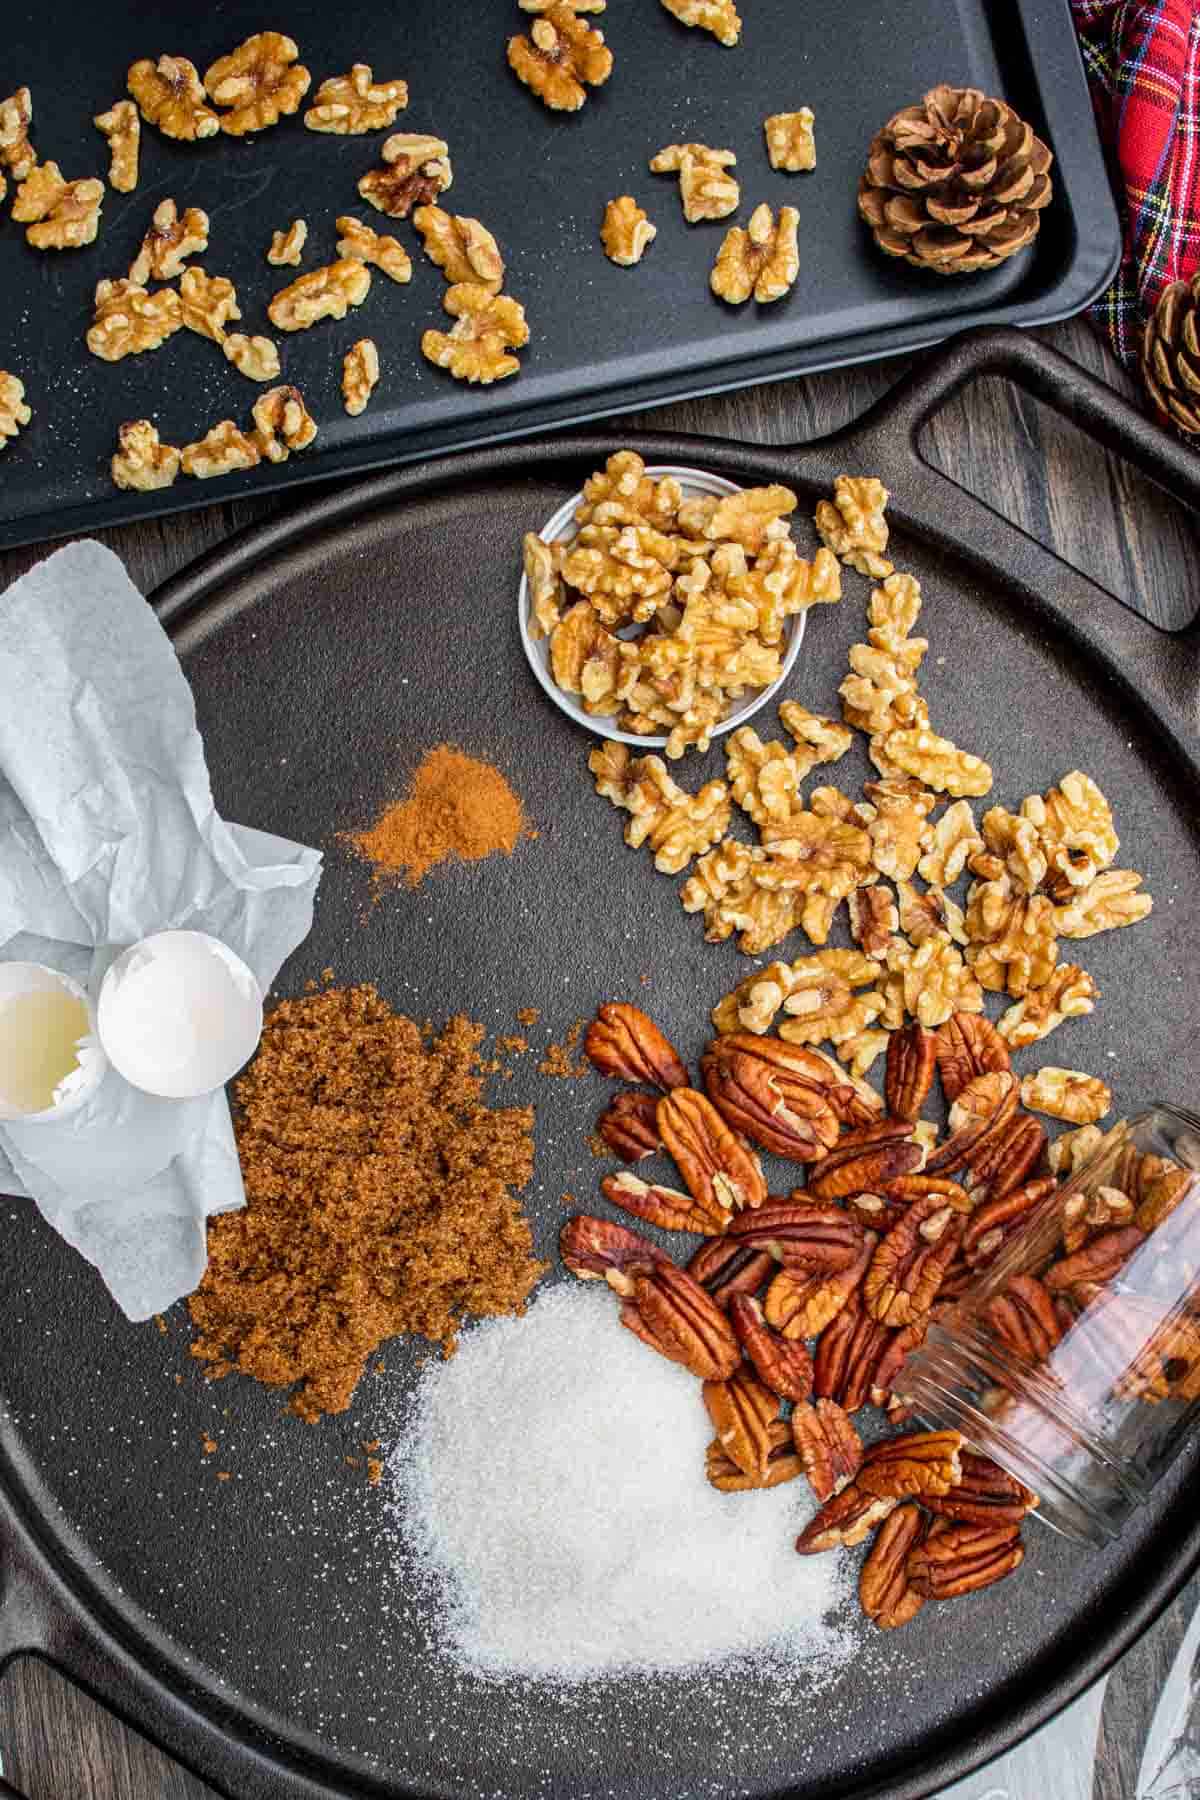 Candied Nuts ingredients